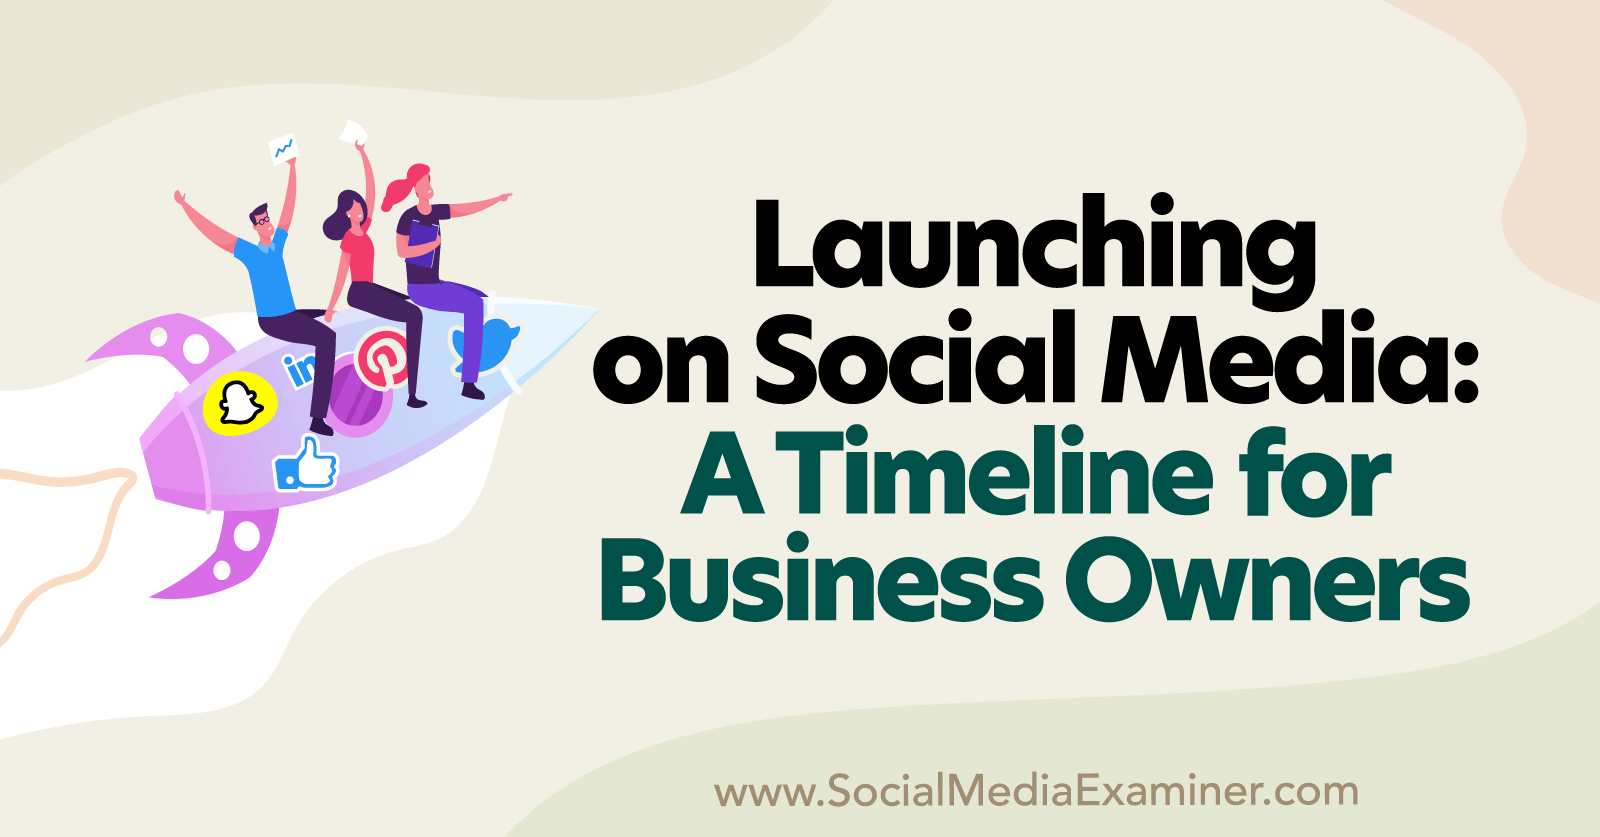 Launching on Social Media: A Timeline for Business Owners by Megan Hannay on Social Media Examiner.